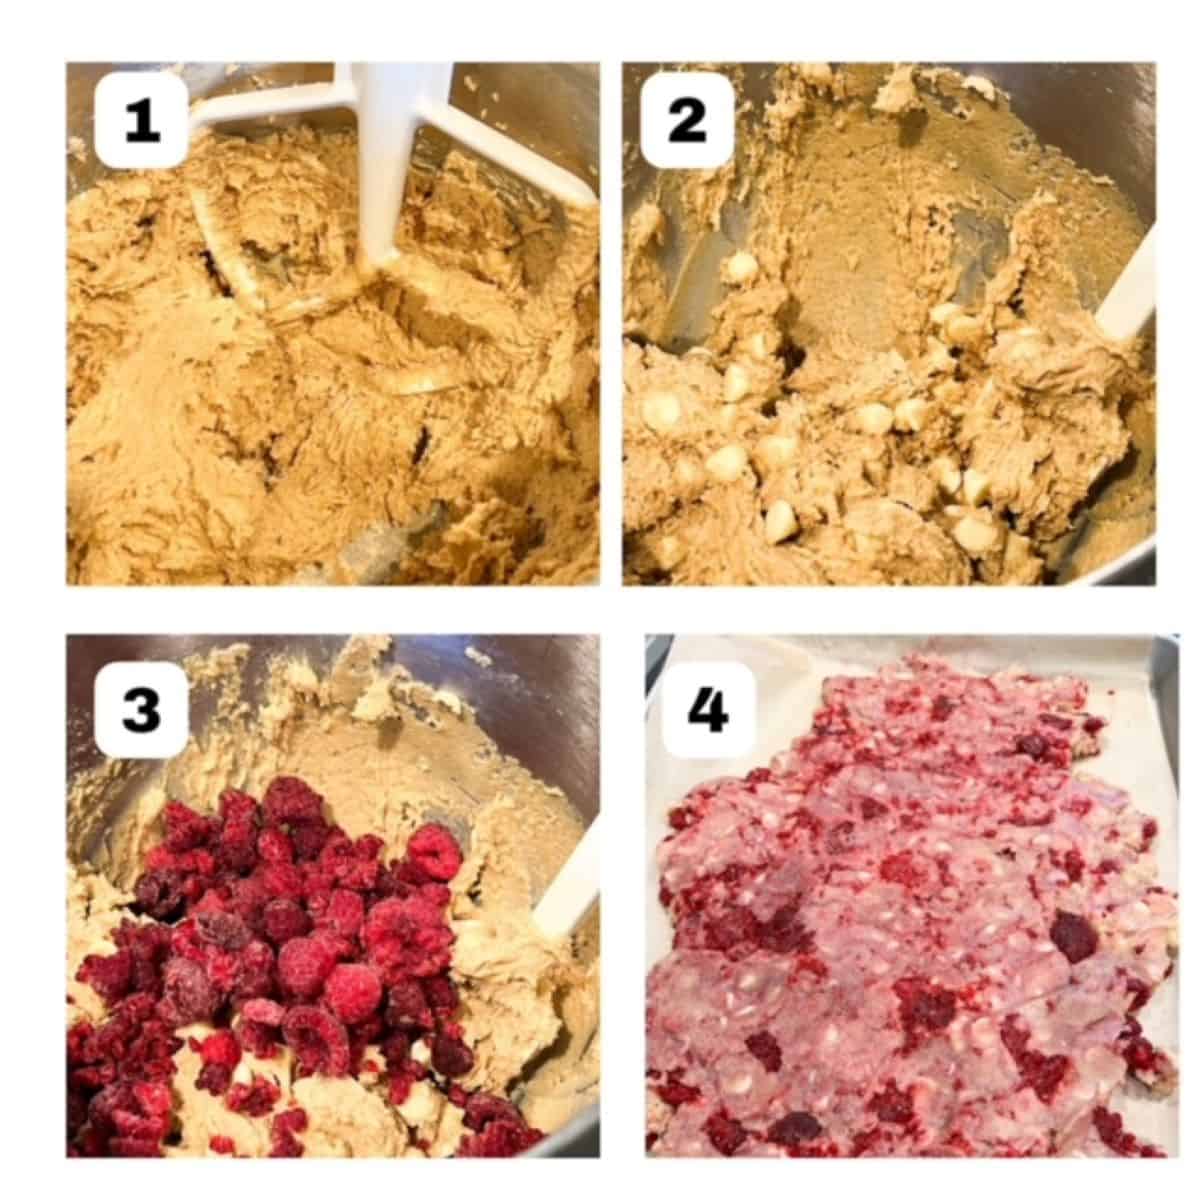 Four process shots showing steps to make Rasperry and White Chocolate Blondies.